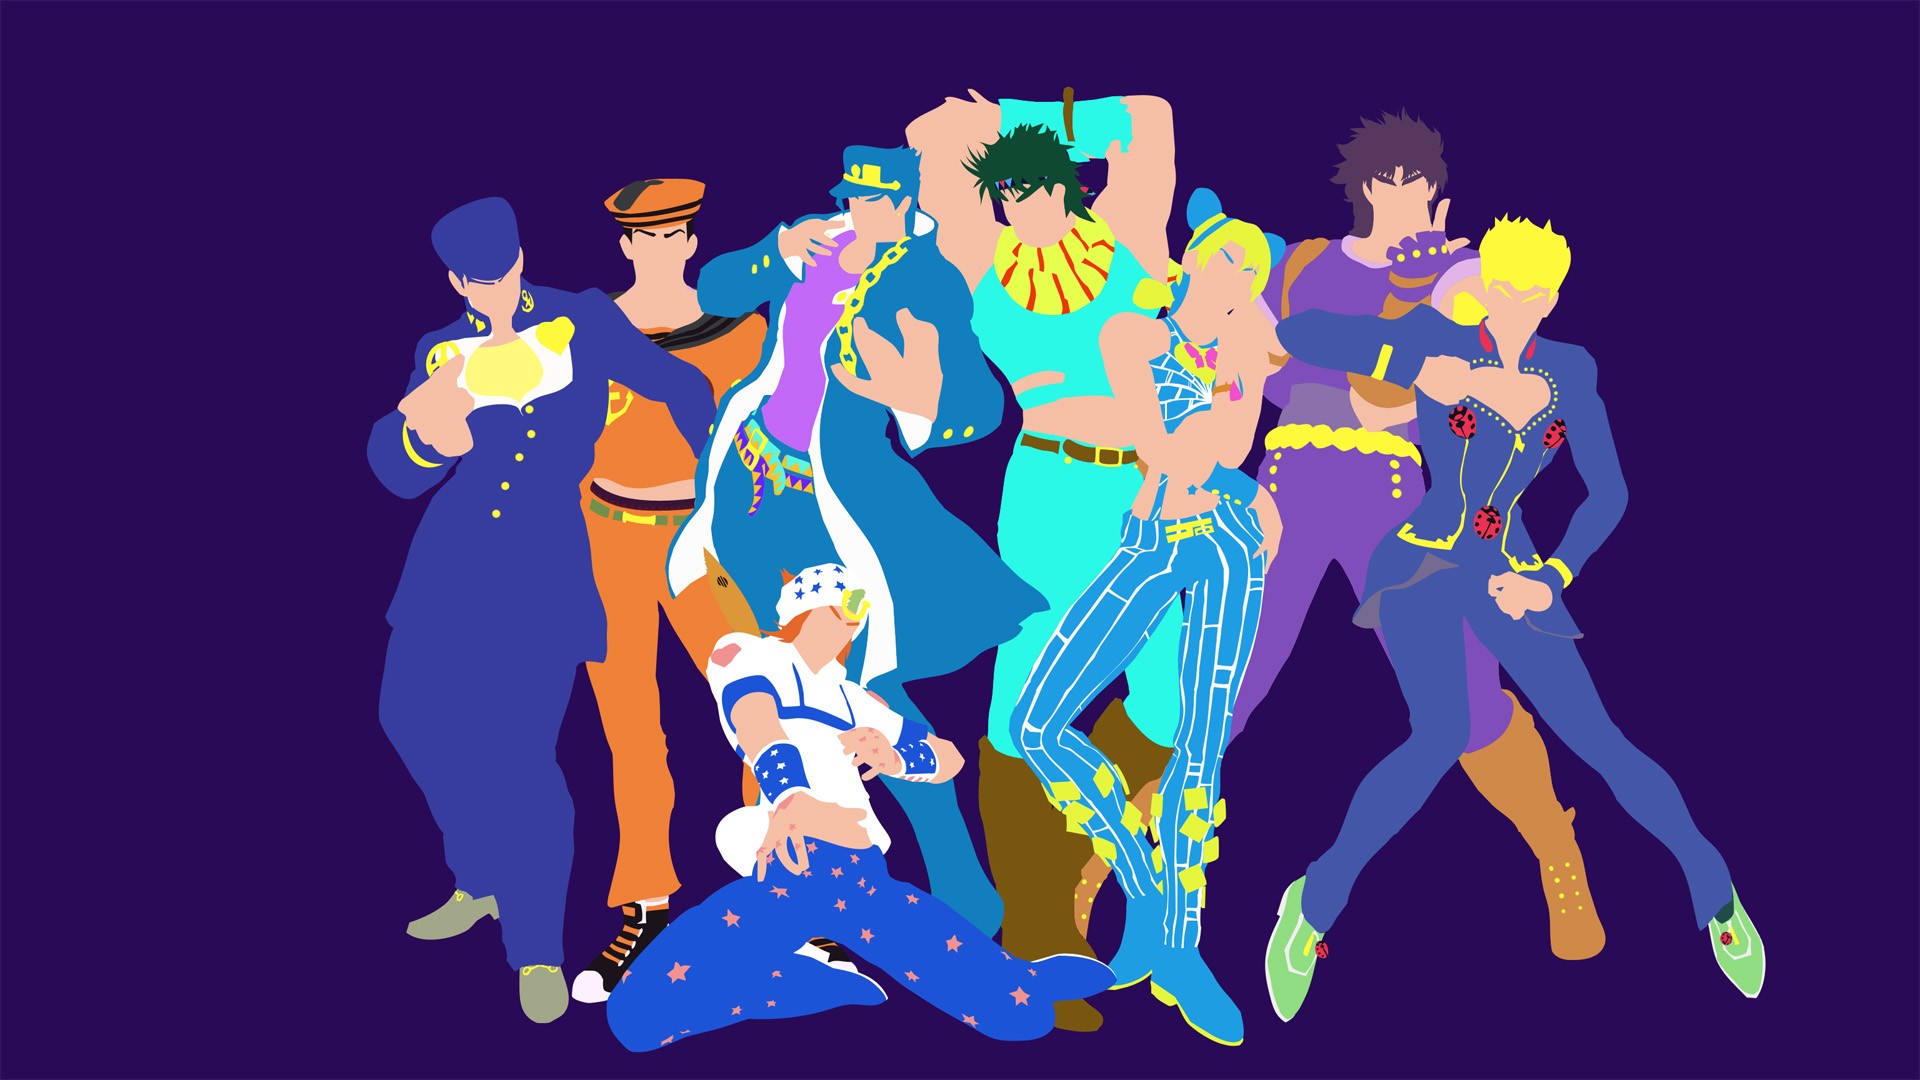 Jojo Bizarre Adventure wallpaper ·① Download free awesome full HD wallpapers for desktop and